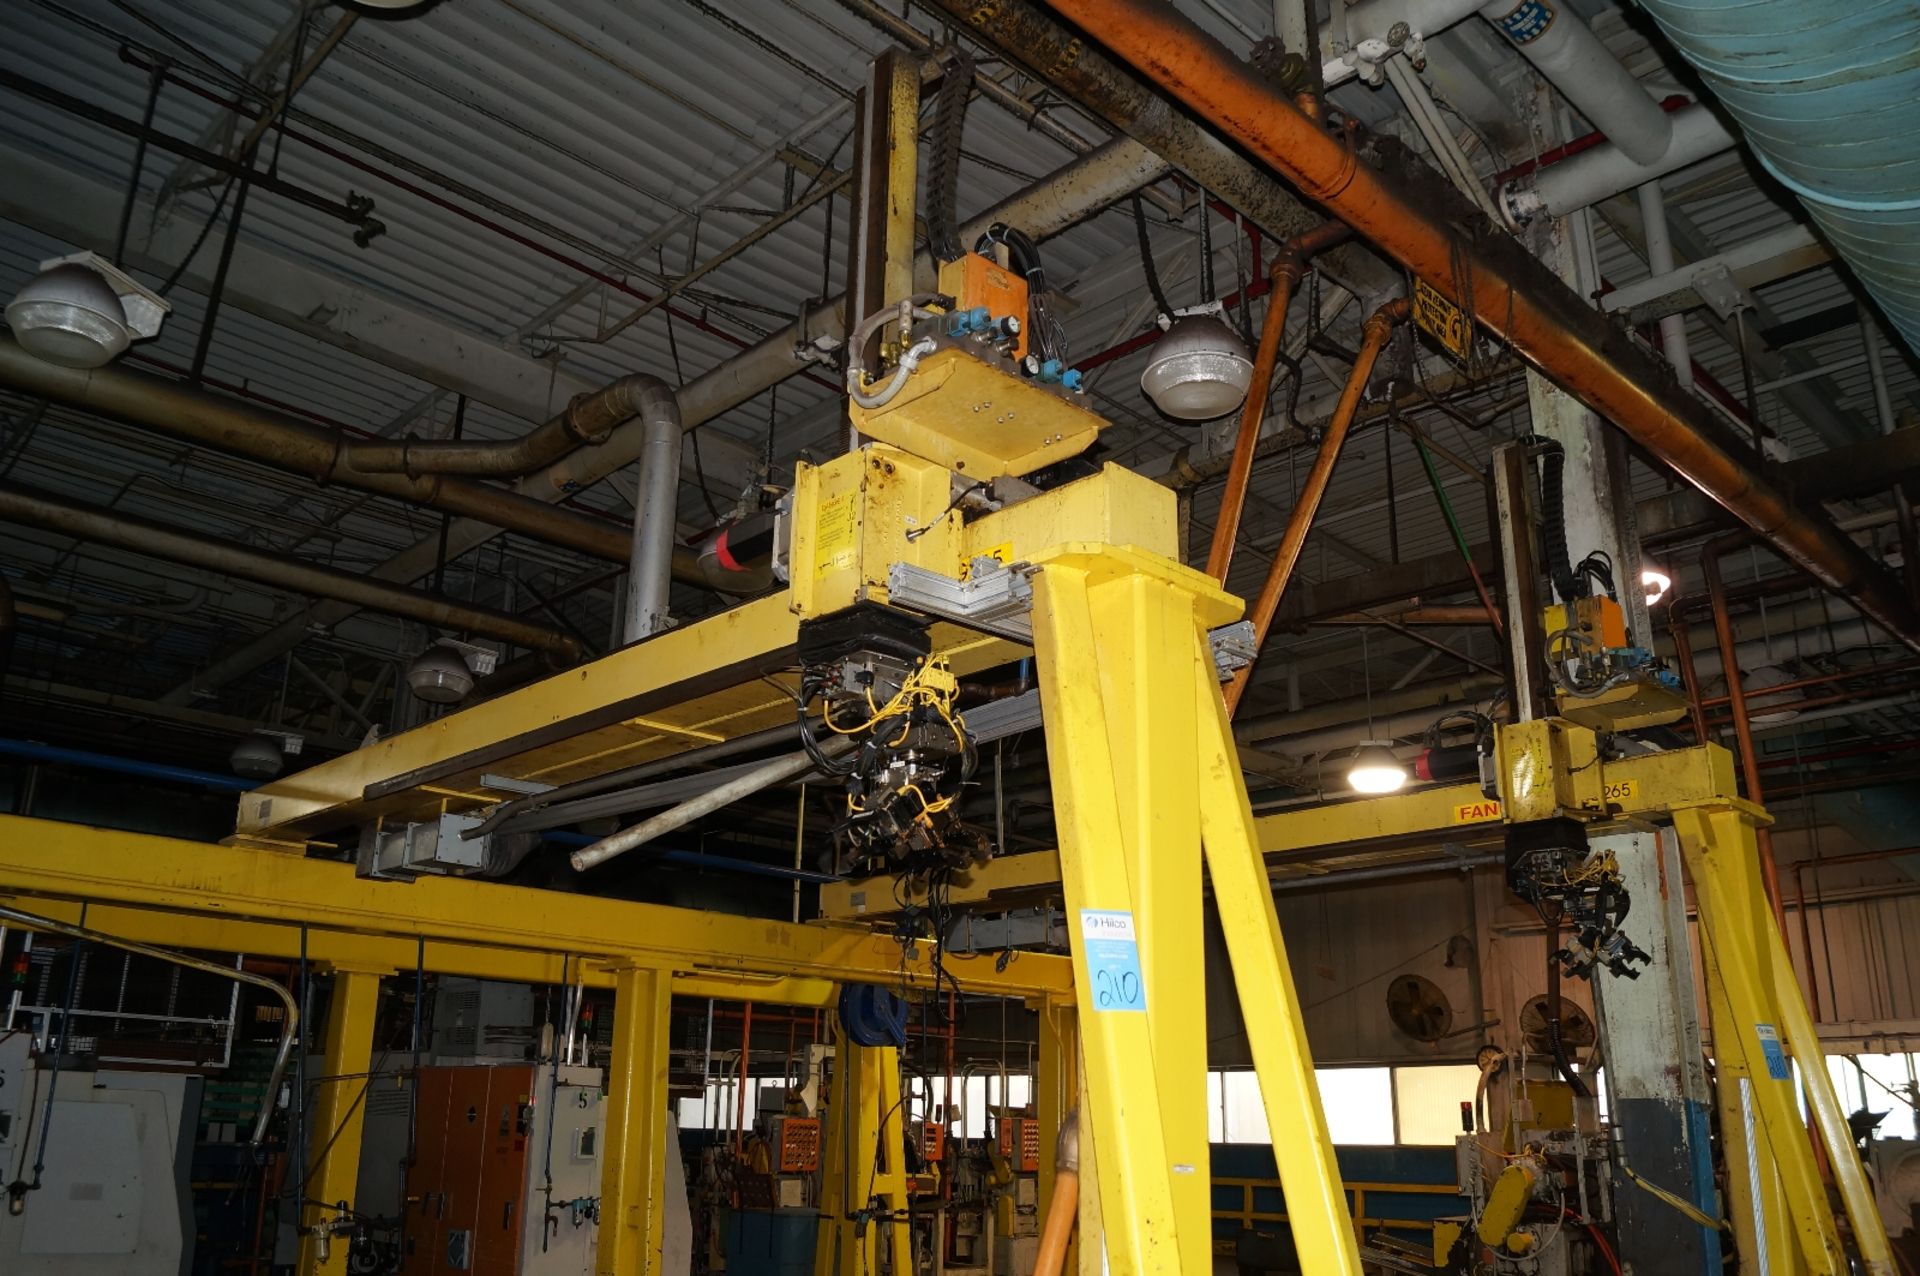 Fanuc Model G265 Gantry  Robots ; Mounted to Gantry System, Post needs to be Cut in Center to